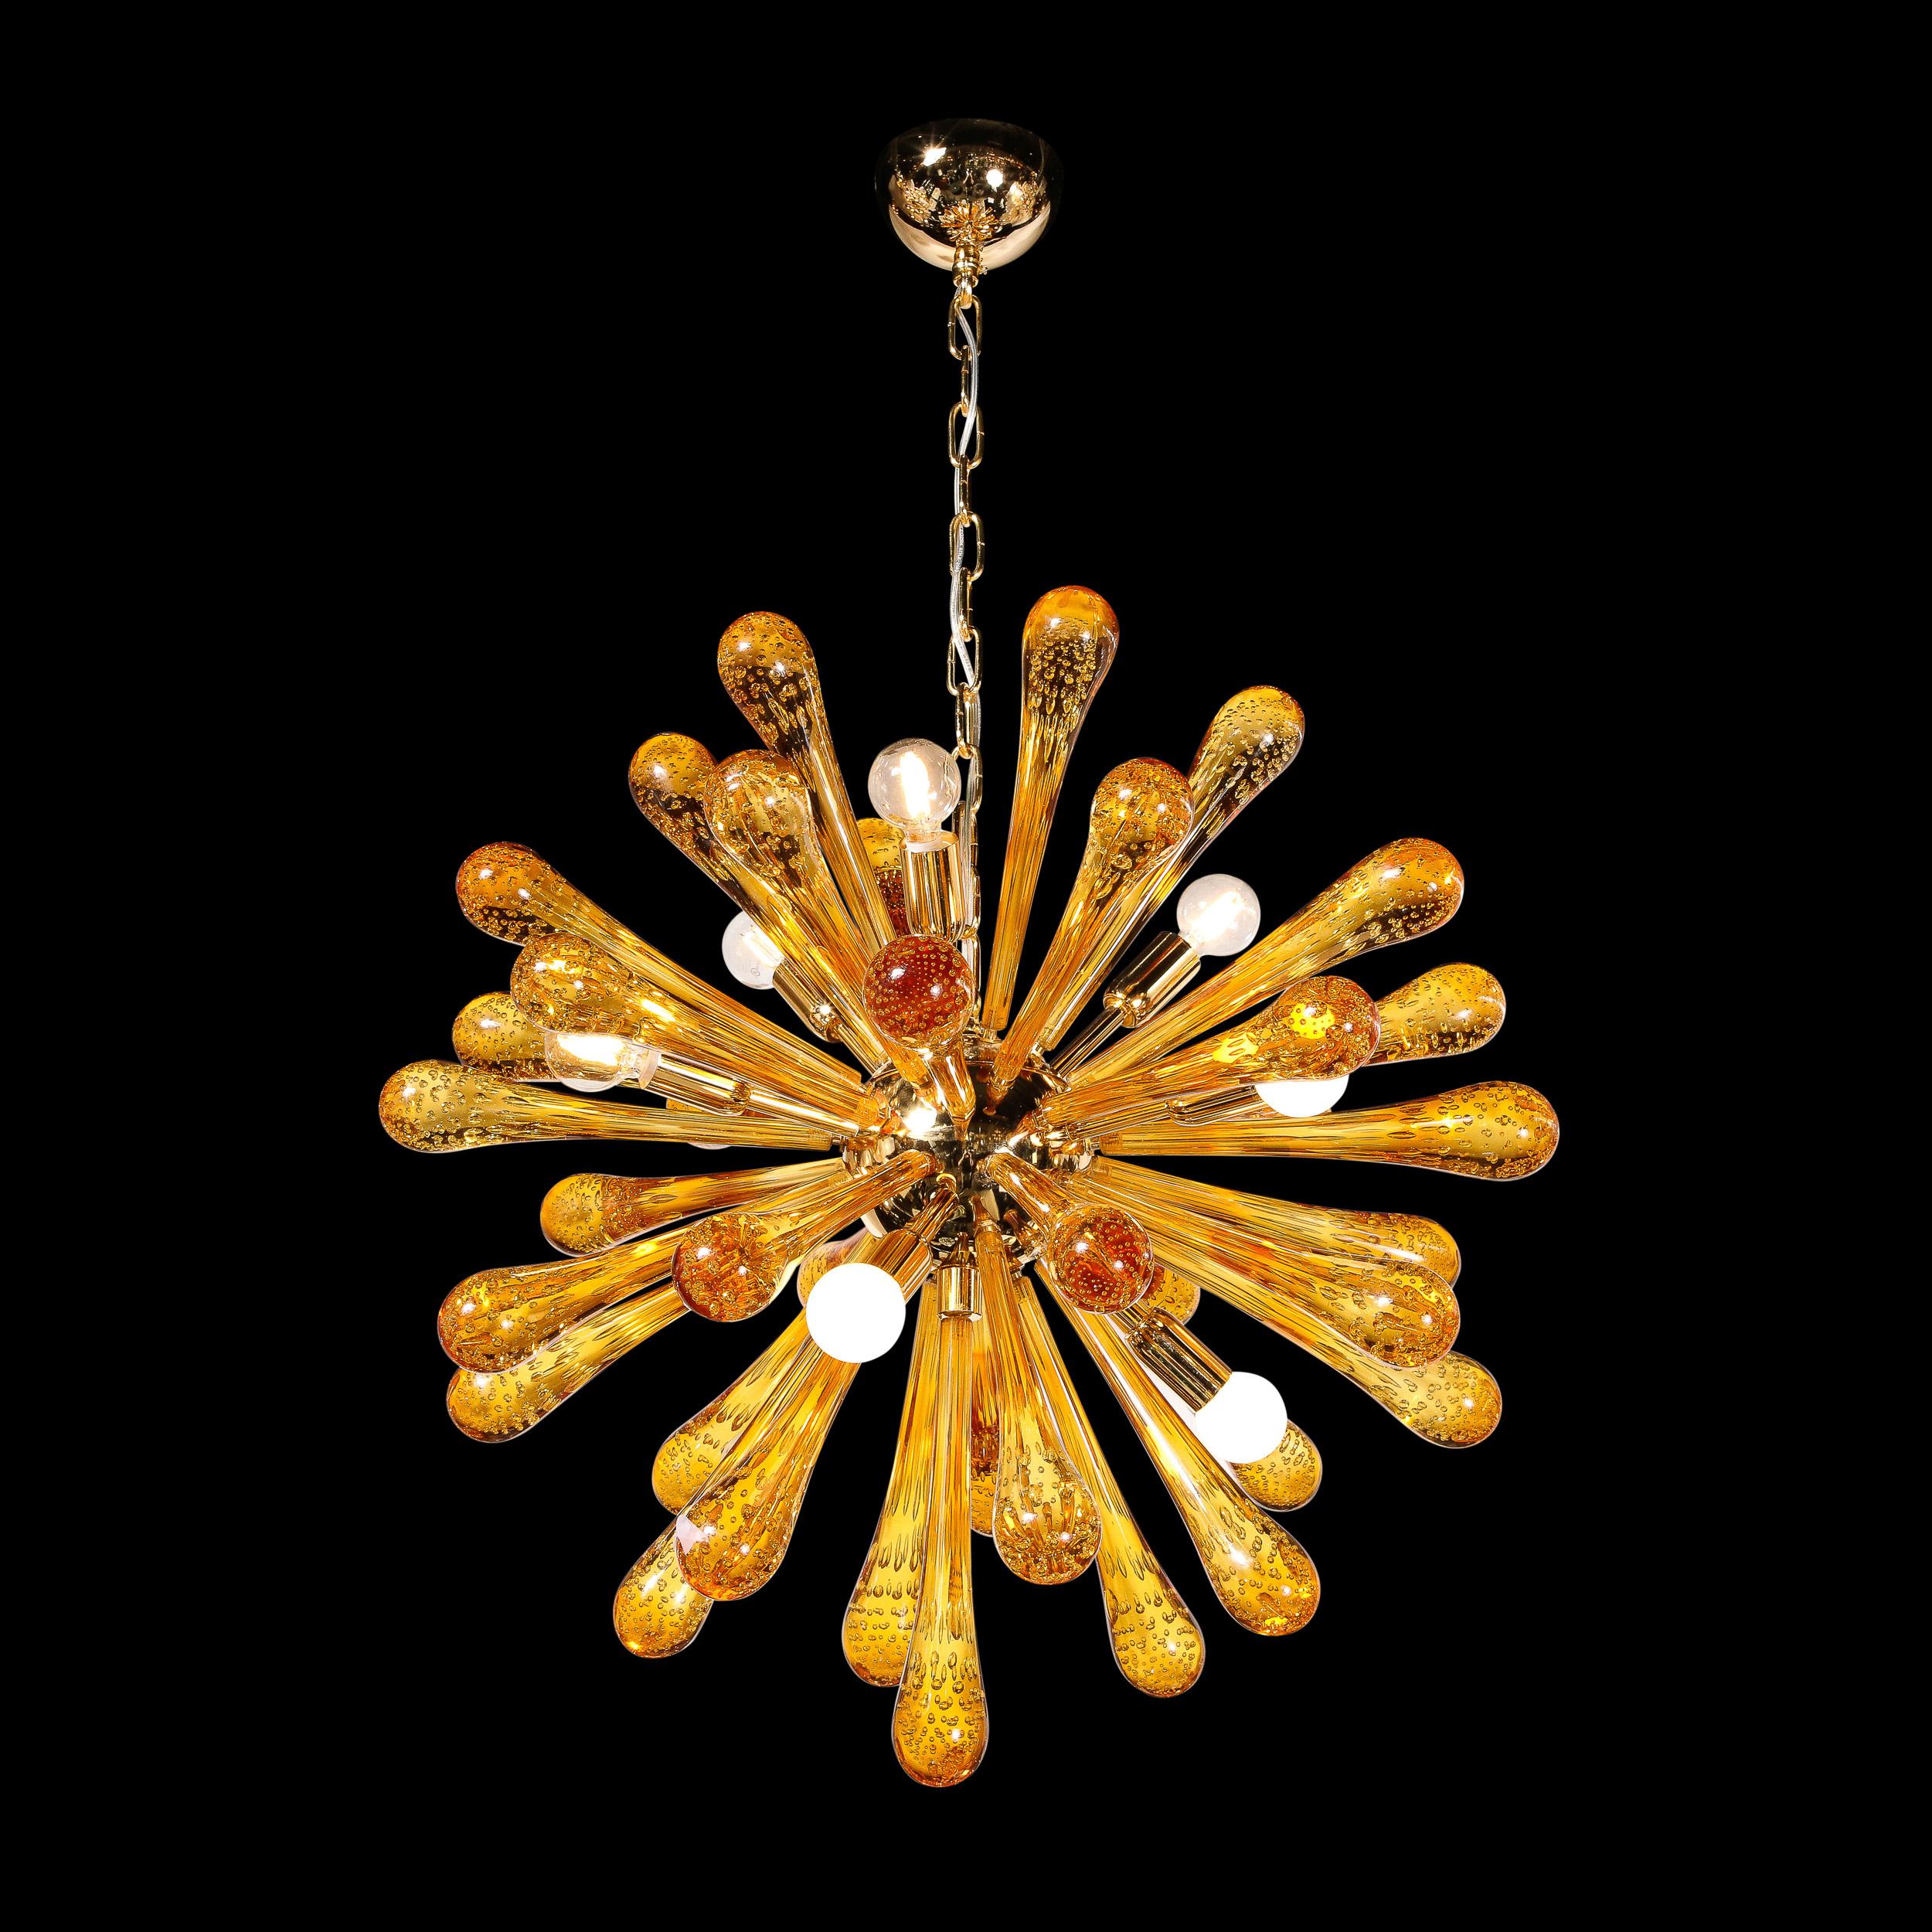 This graphic and sophisticated Sputnik was hand blown in Murano, Italy- the island off the coast of Venice renowned for centuries for its superlative glass production. It features an abundance of glass rods with bulbous ends of translucent glass in